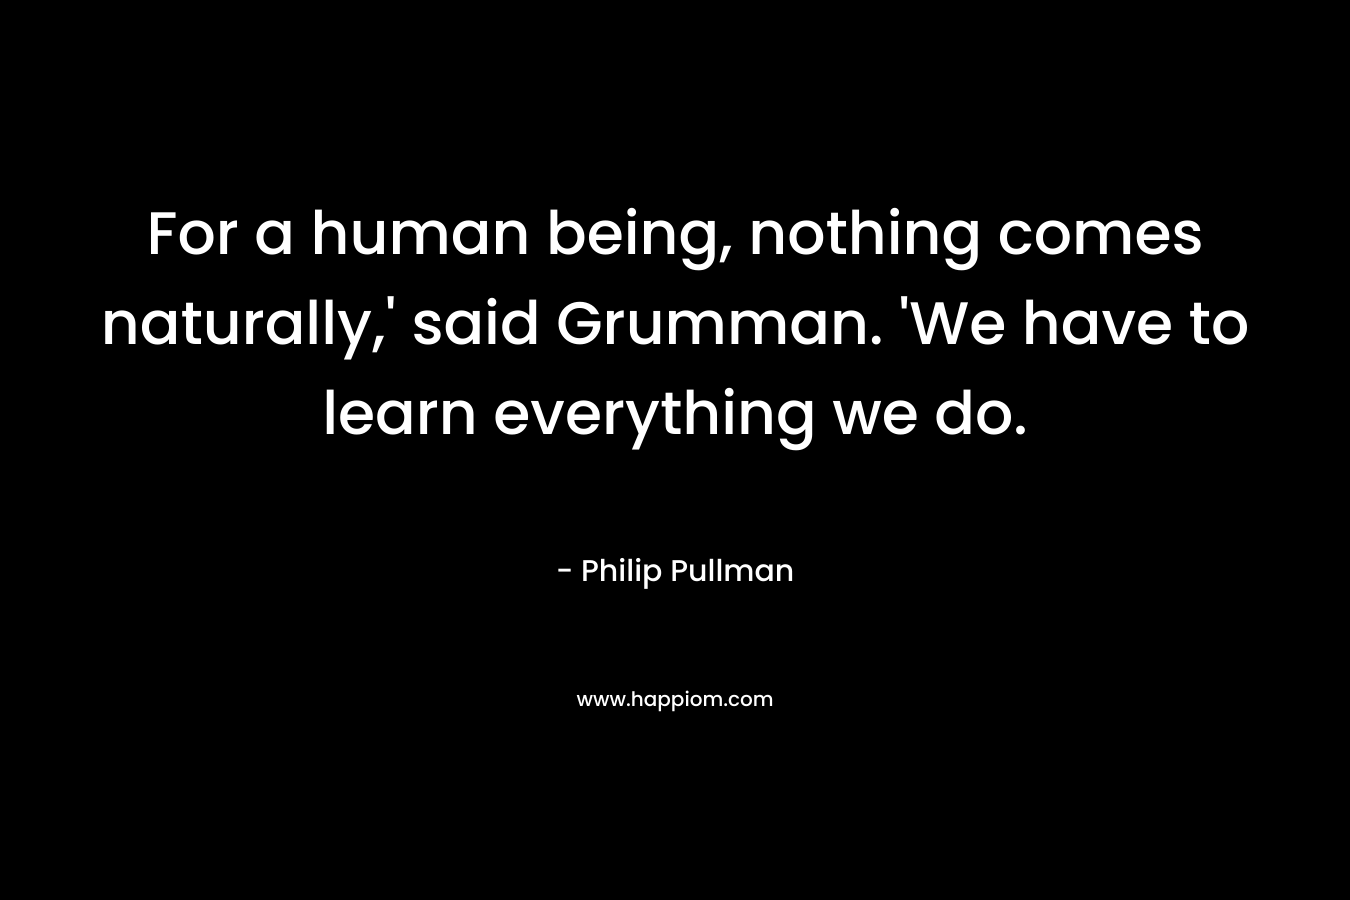 For a human being, nothing comes naturally,' said Grumman. 'We have to learn everything we do.